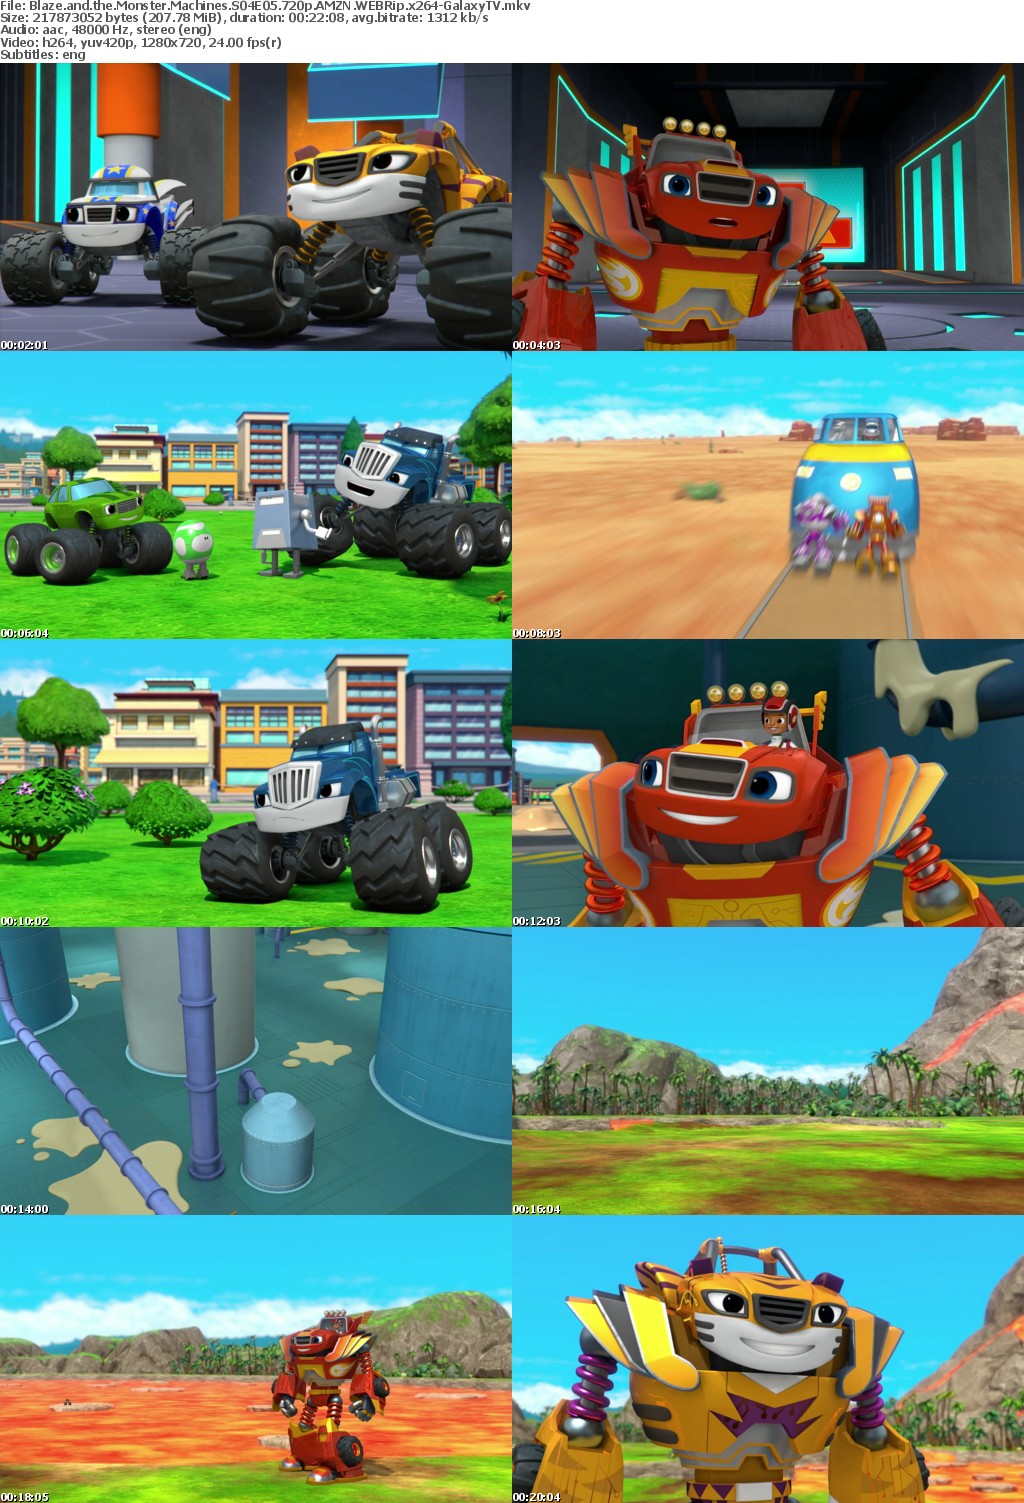 Blaze and the Monster Machines S04 COMPLETE 720p AMZN WEBRip x264-GalaxyTV